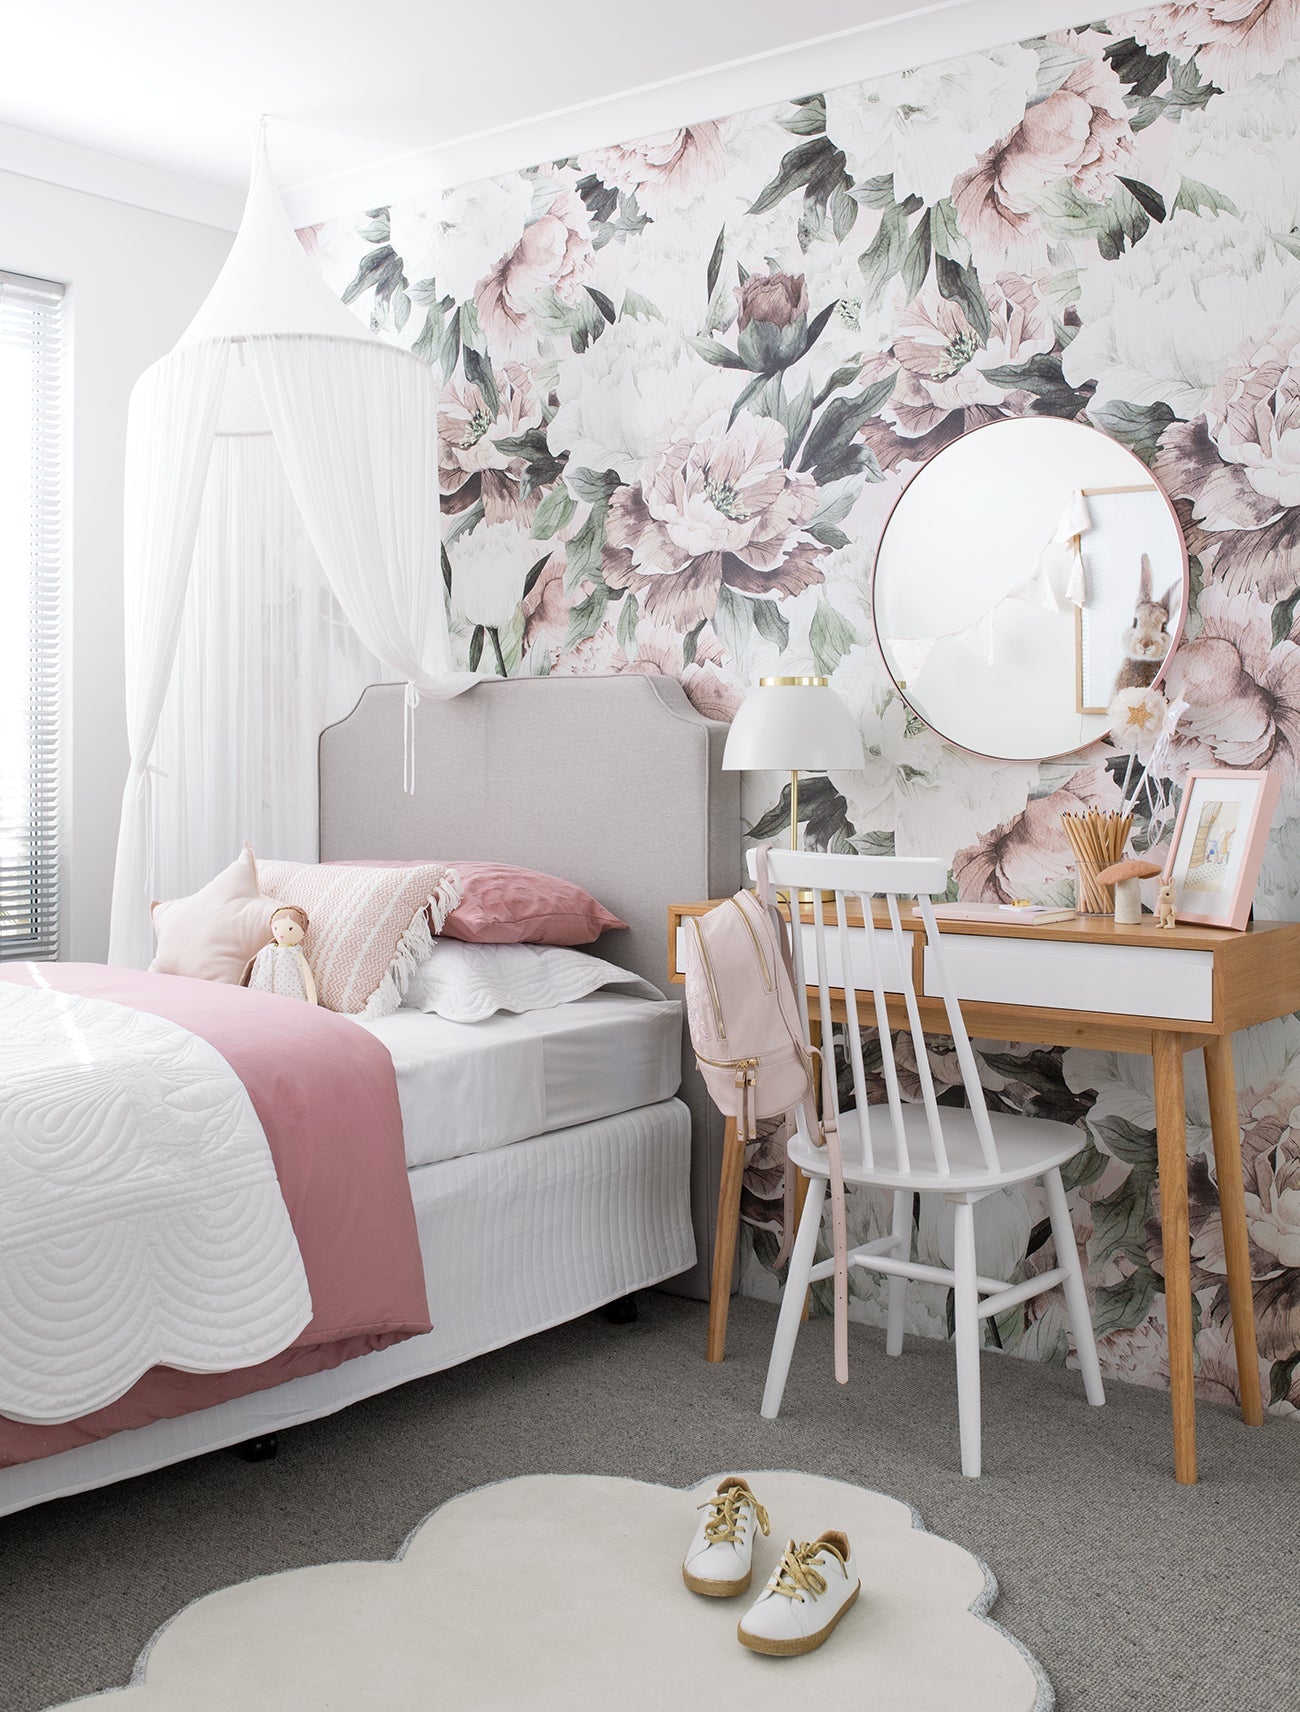 Peel and stick. Peel and stick wallpaper. Removable wallpaper. Dreaming in Pastels Wallpaper. Floral Wallpaper. Wallpapers